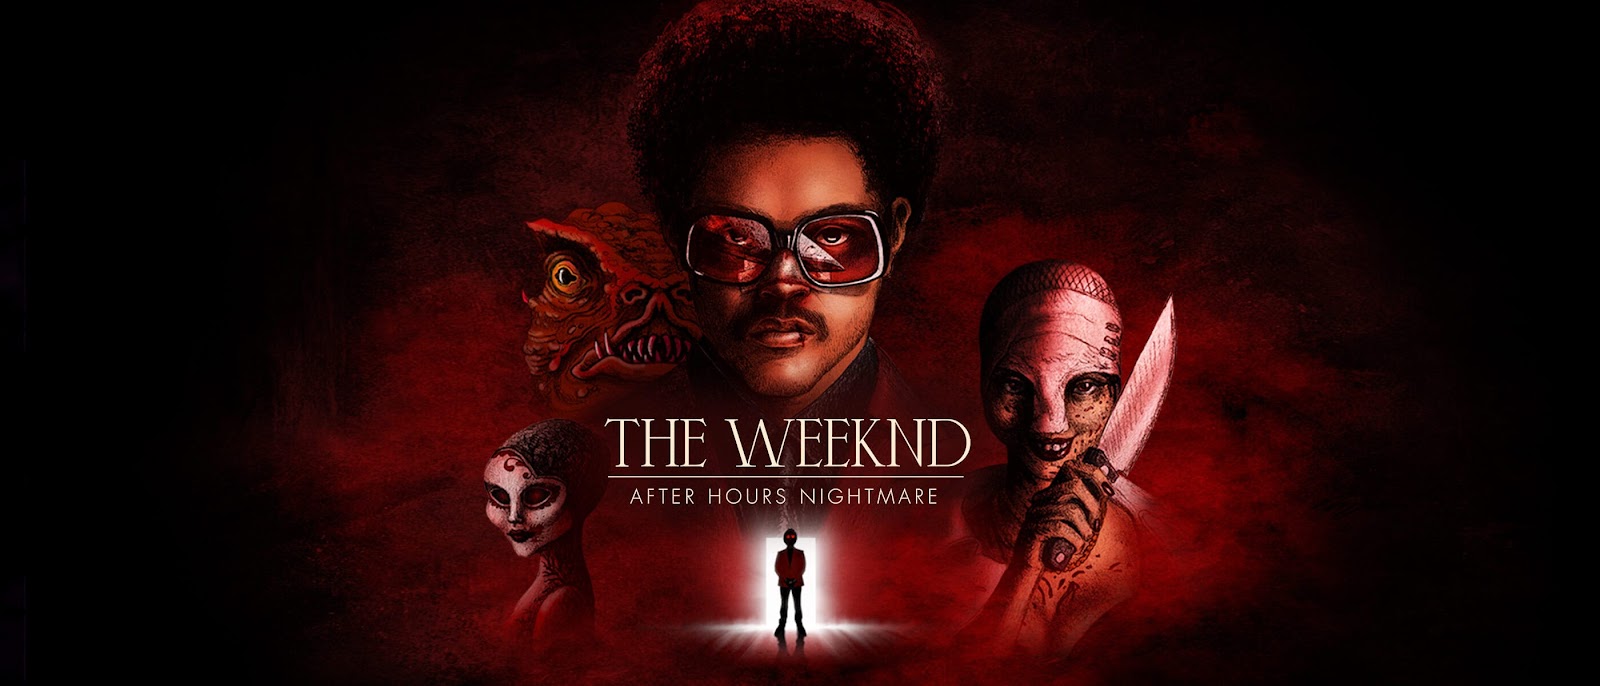 The Weeknd: After Hours Nightmare with the artist surrounded by demonic figures and a silhouette of himself in a doorway.